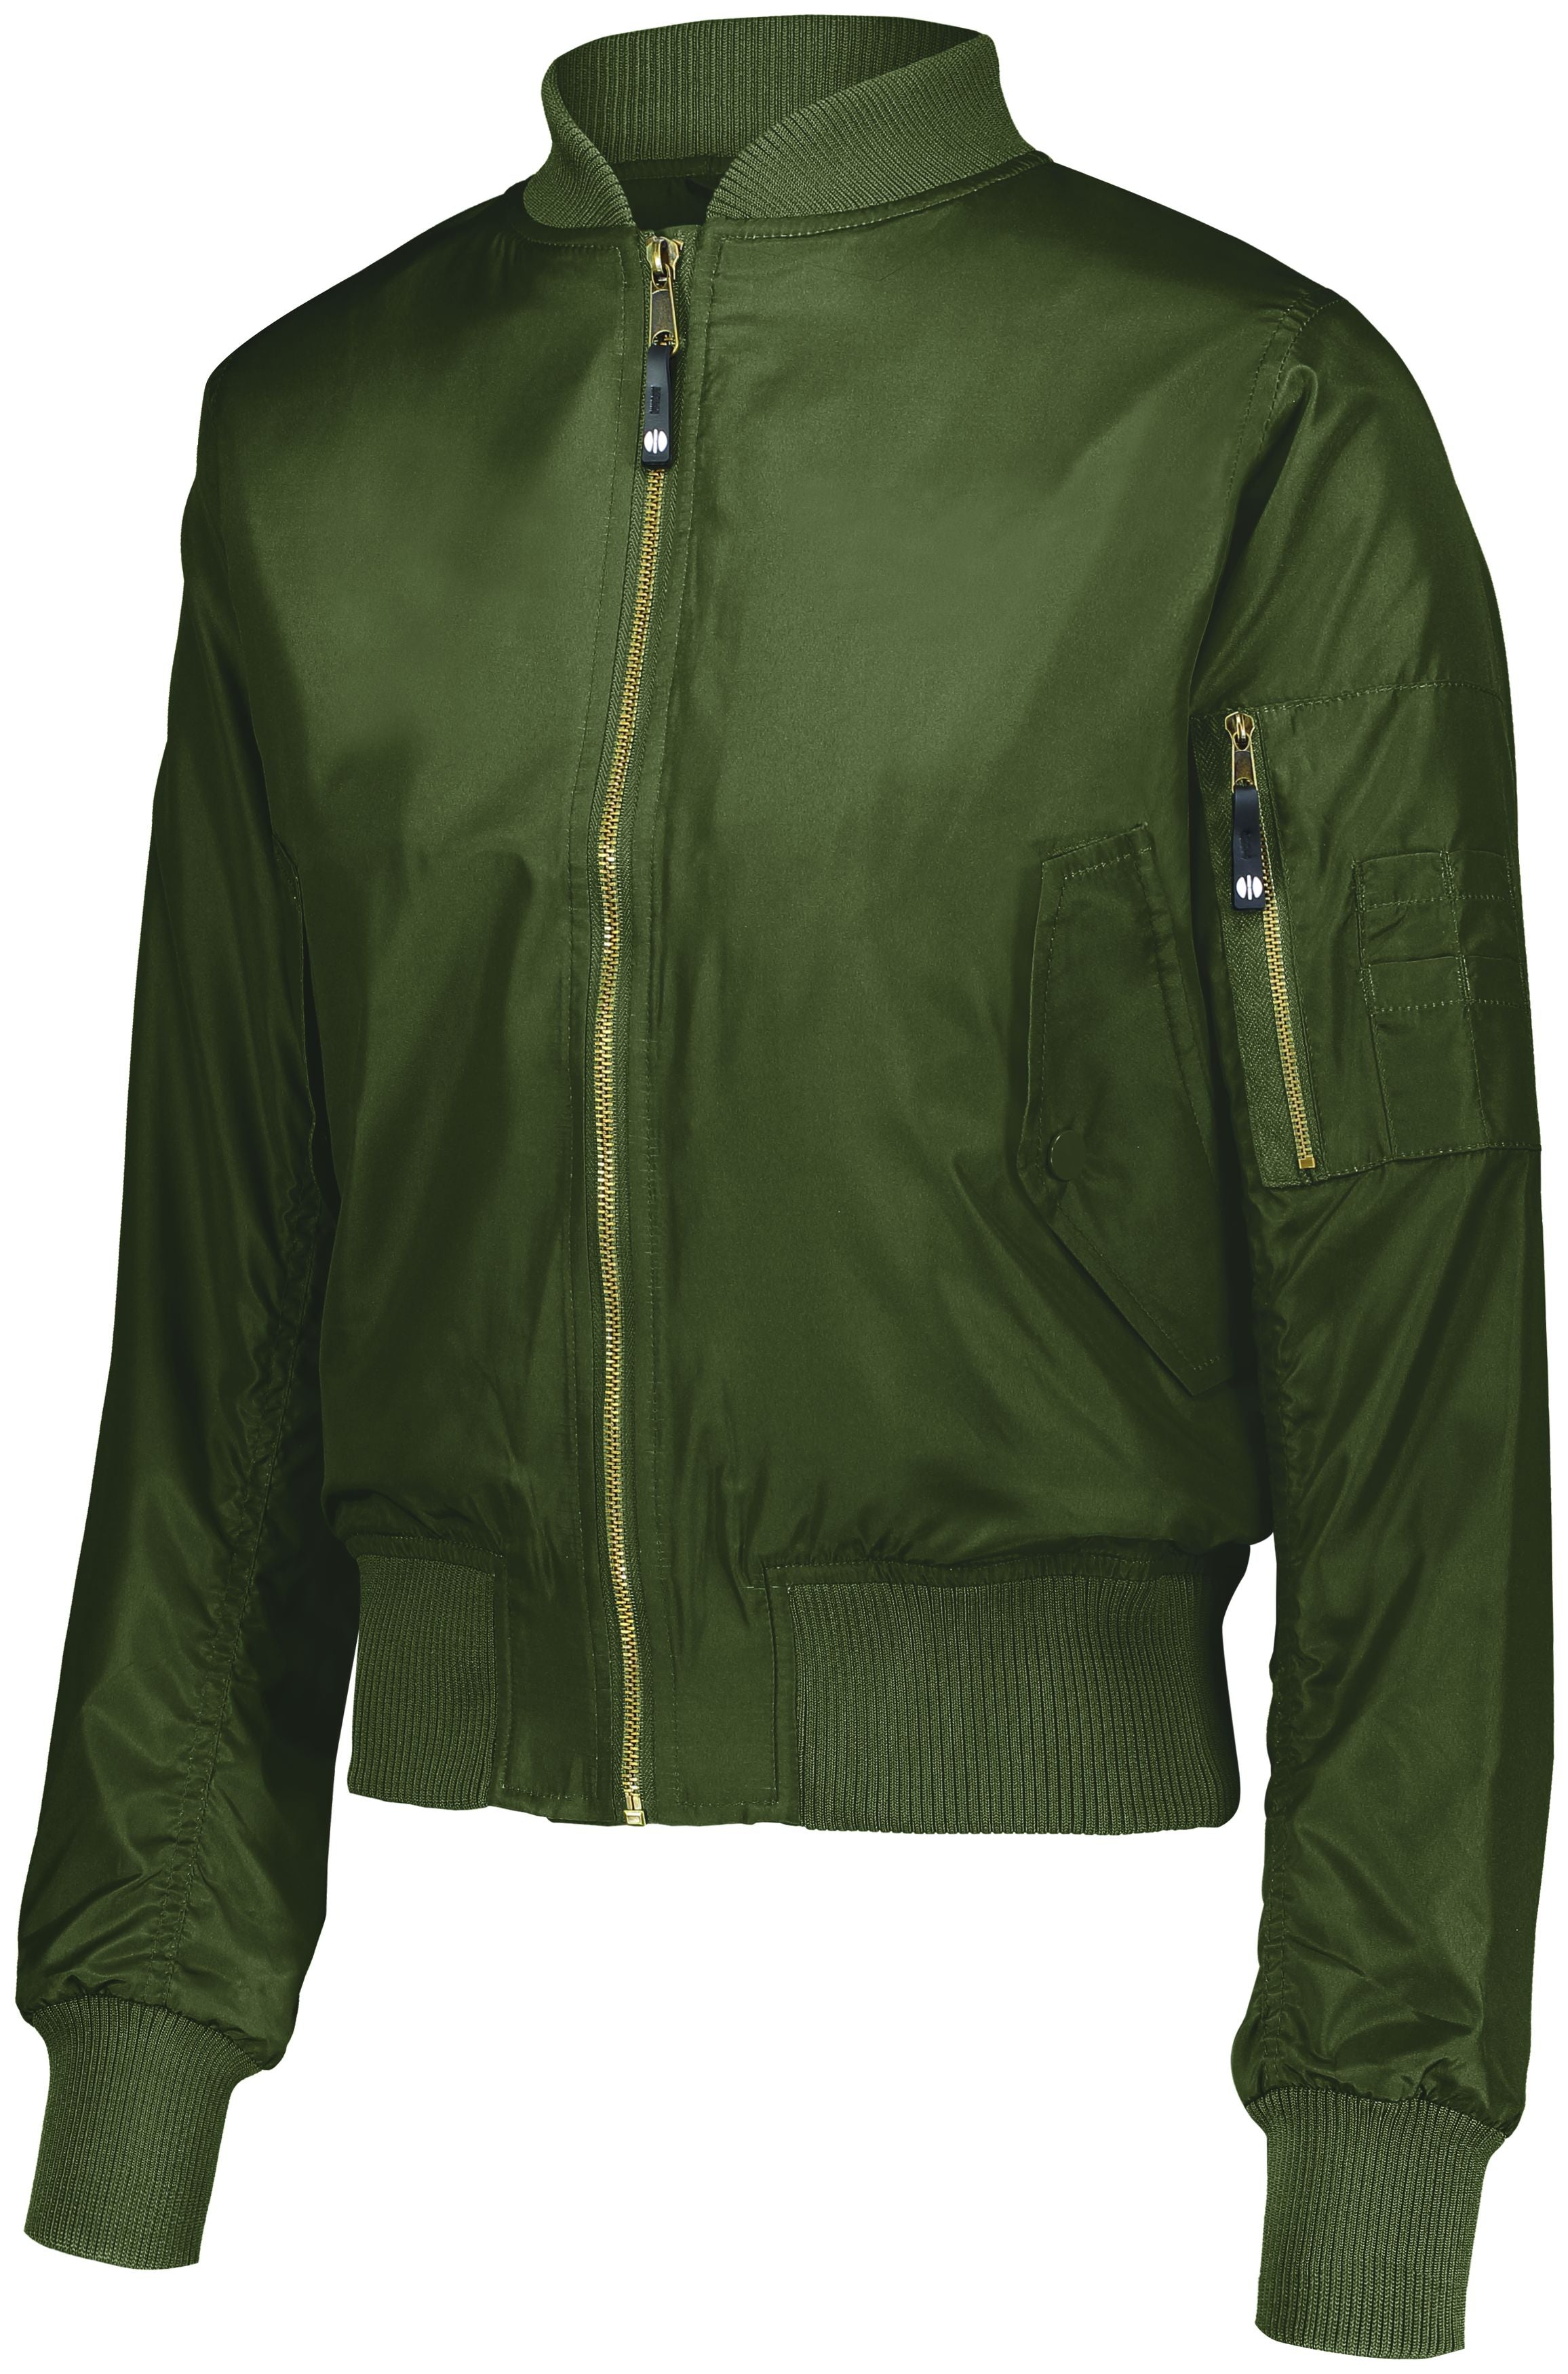 Holloway Ladies Flight Bomber Jacket in Army Green  -Part of the Ladies, Ladies-Jacket, Holloway, Outerwear product lines at KanaleyCreations.com